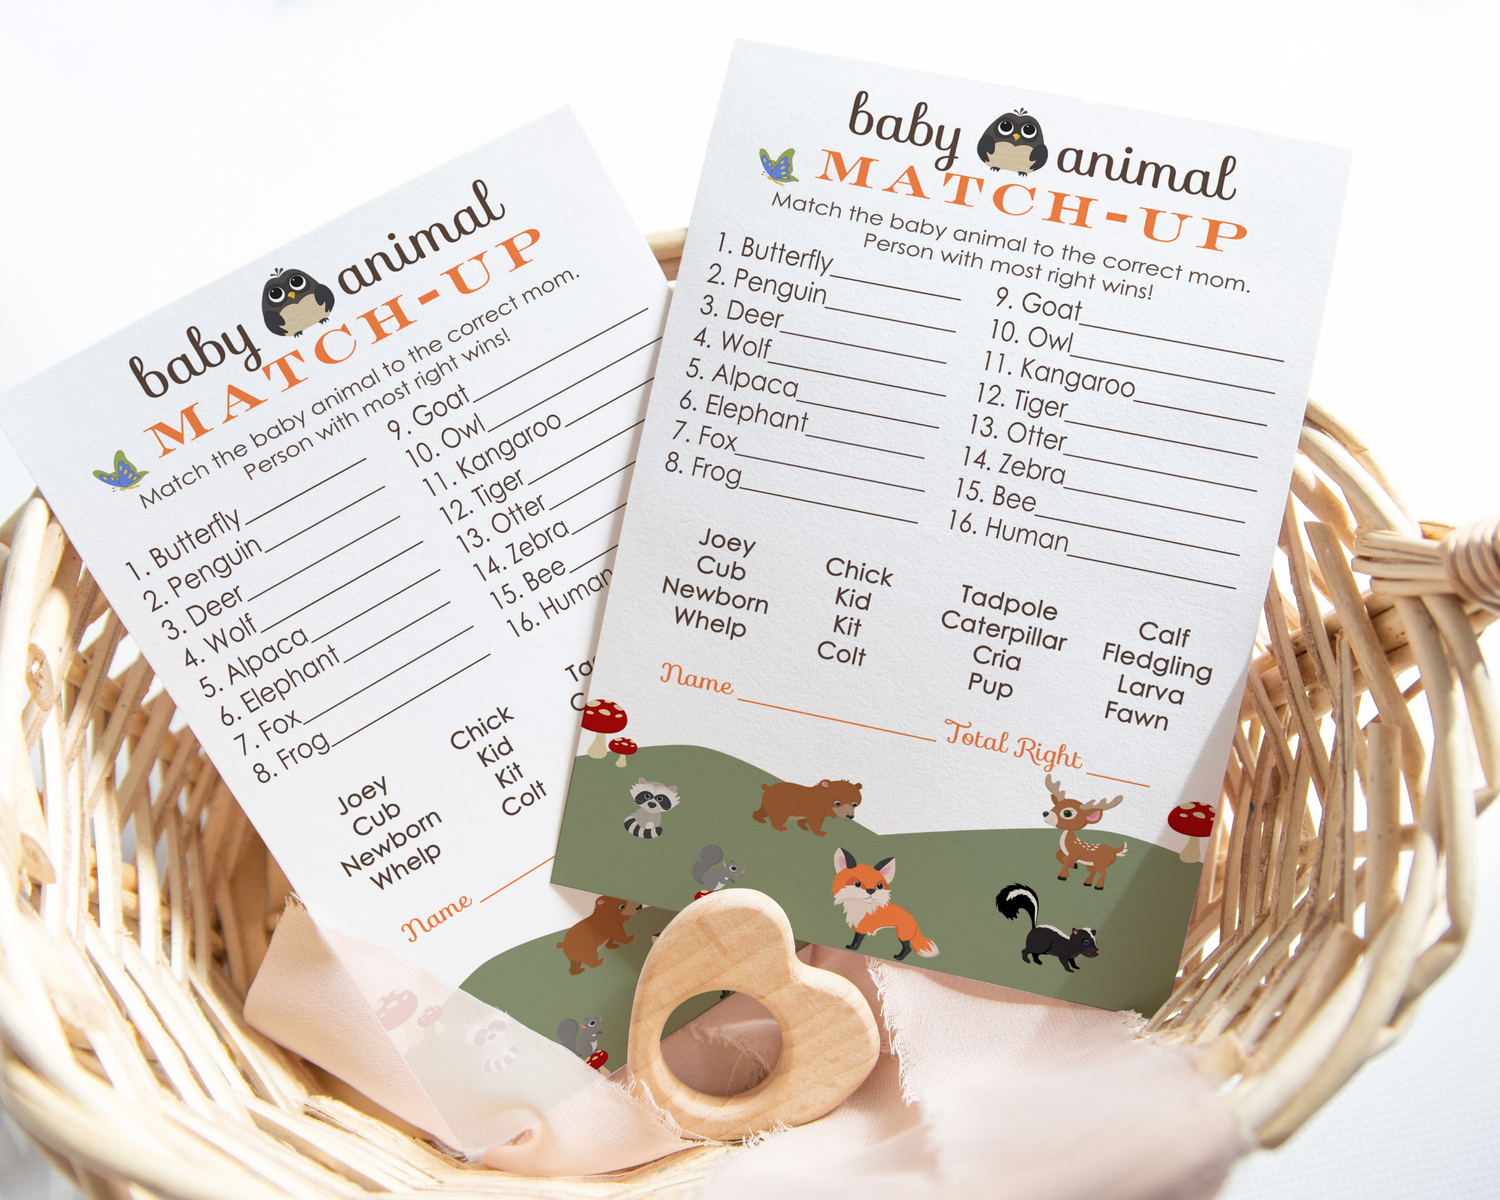 Embark on a woodland adventure with our gender-neutral baby shower theme. Our collection features enchanting invitations, thank you cards, and games, all nestled in a forest of whimsy for your boy or girl’s welcoming celebration.